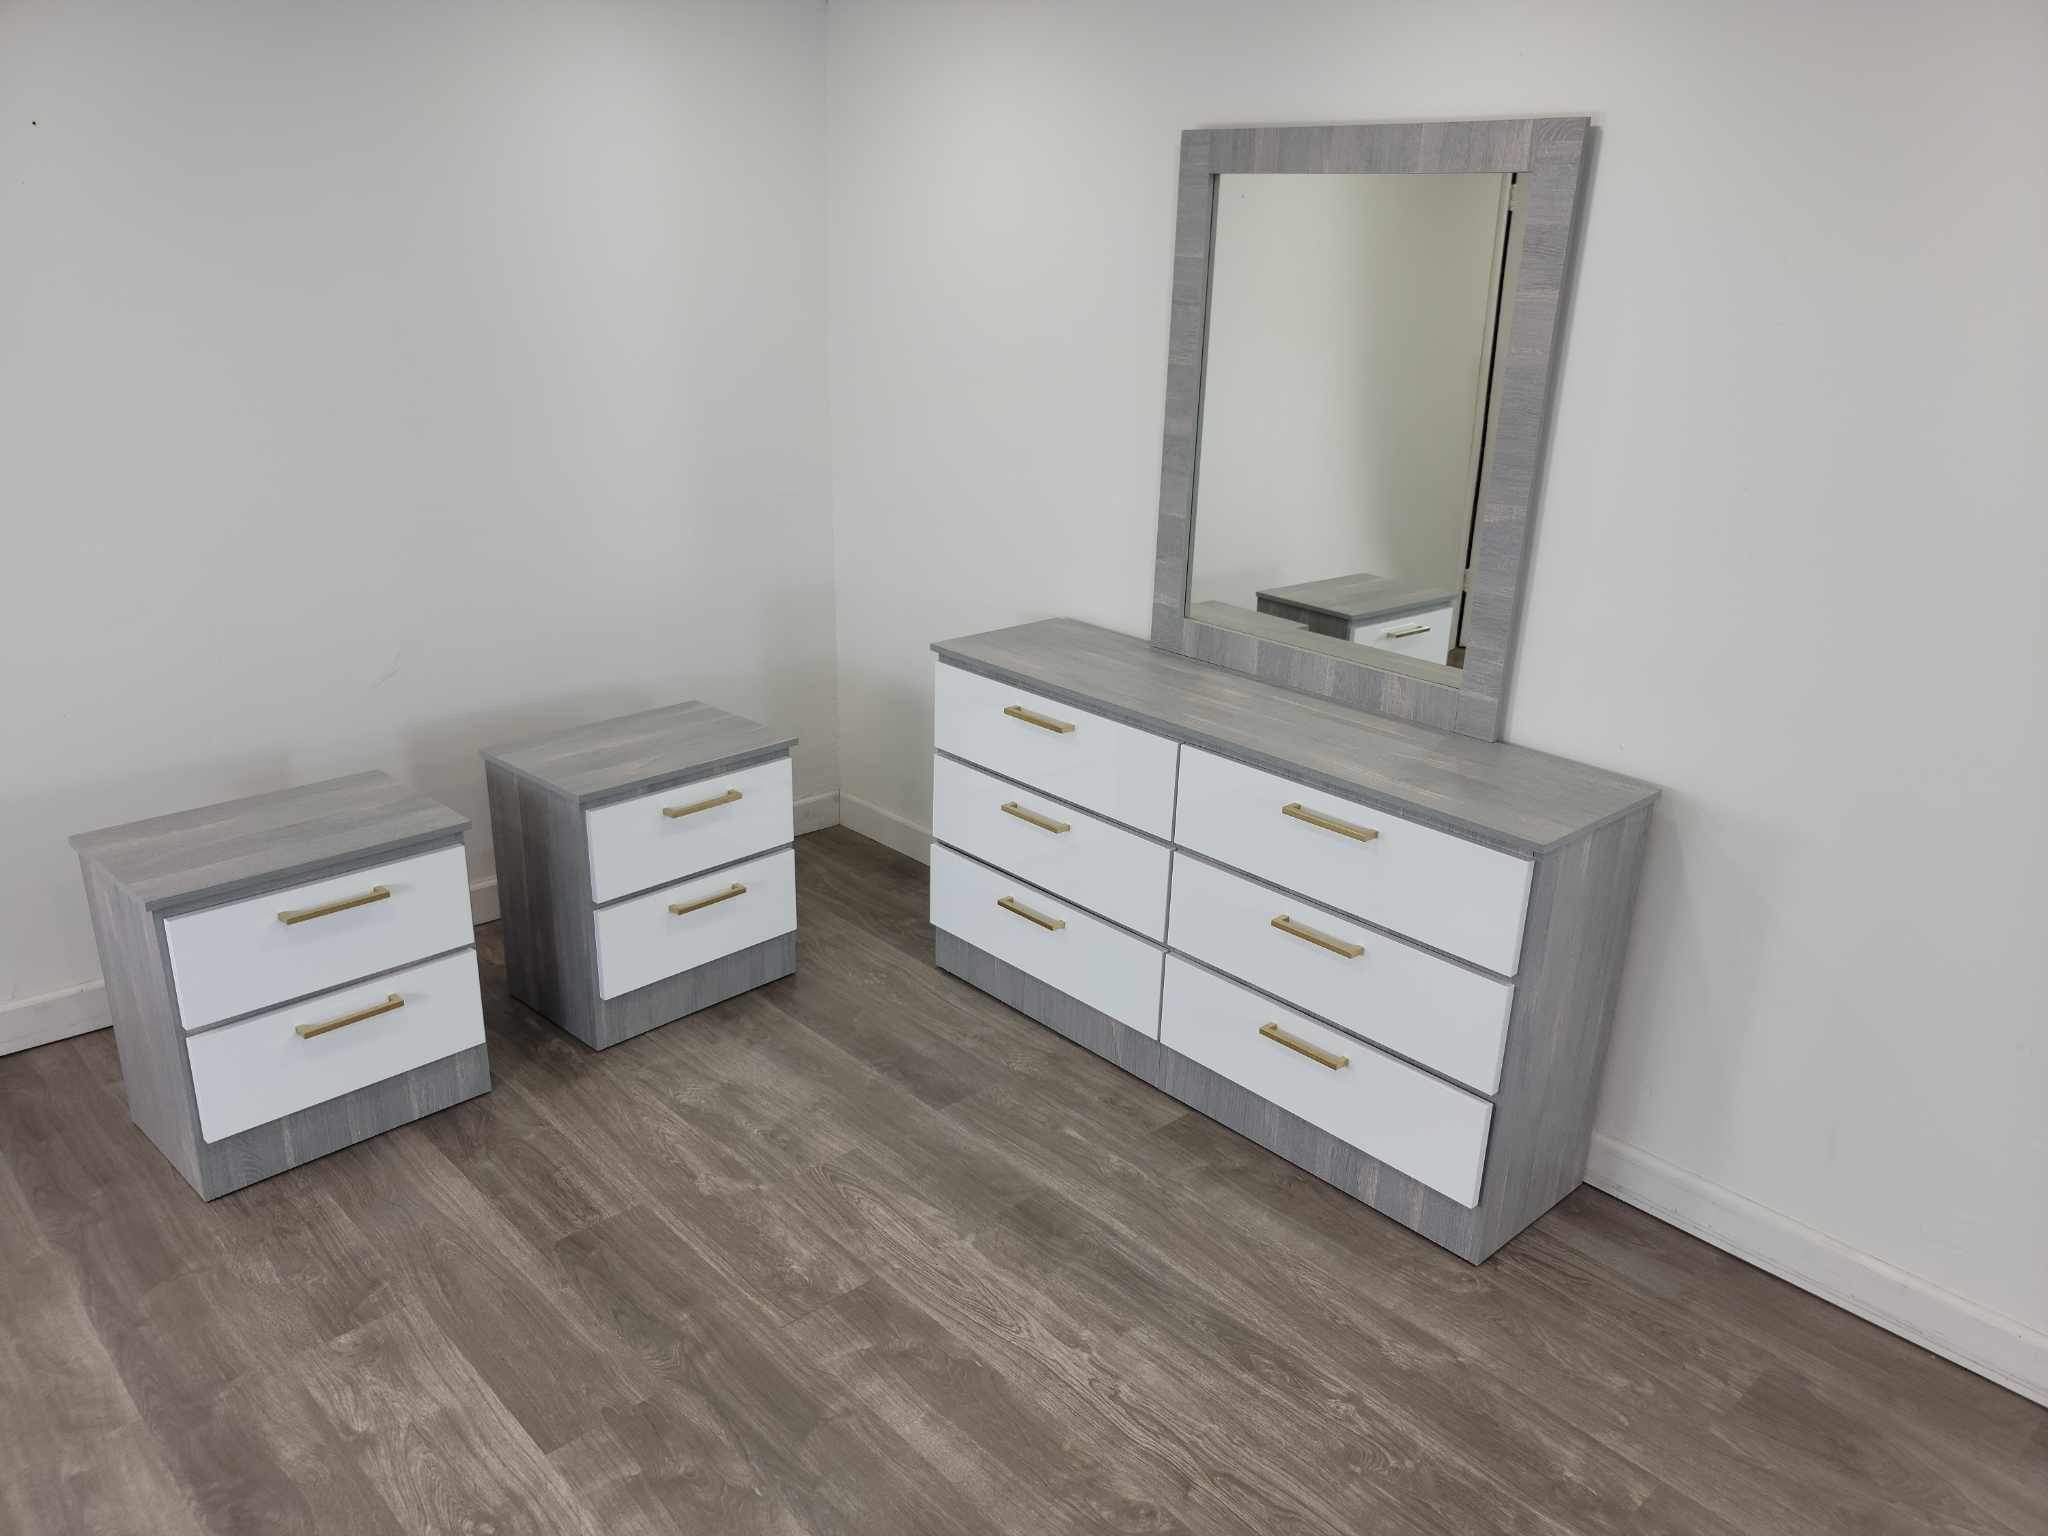 Brand New Dresser with Mirror and 2 Nightstands / Dresser with Mirror and 2 Nightstands … Delivery 🚚 